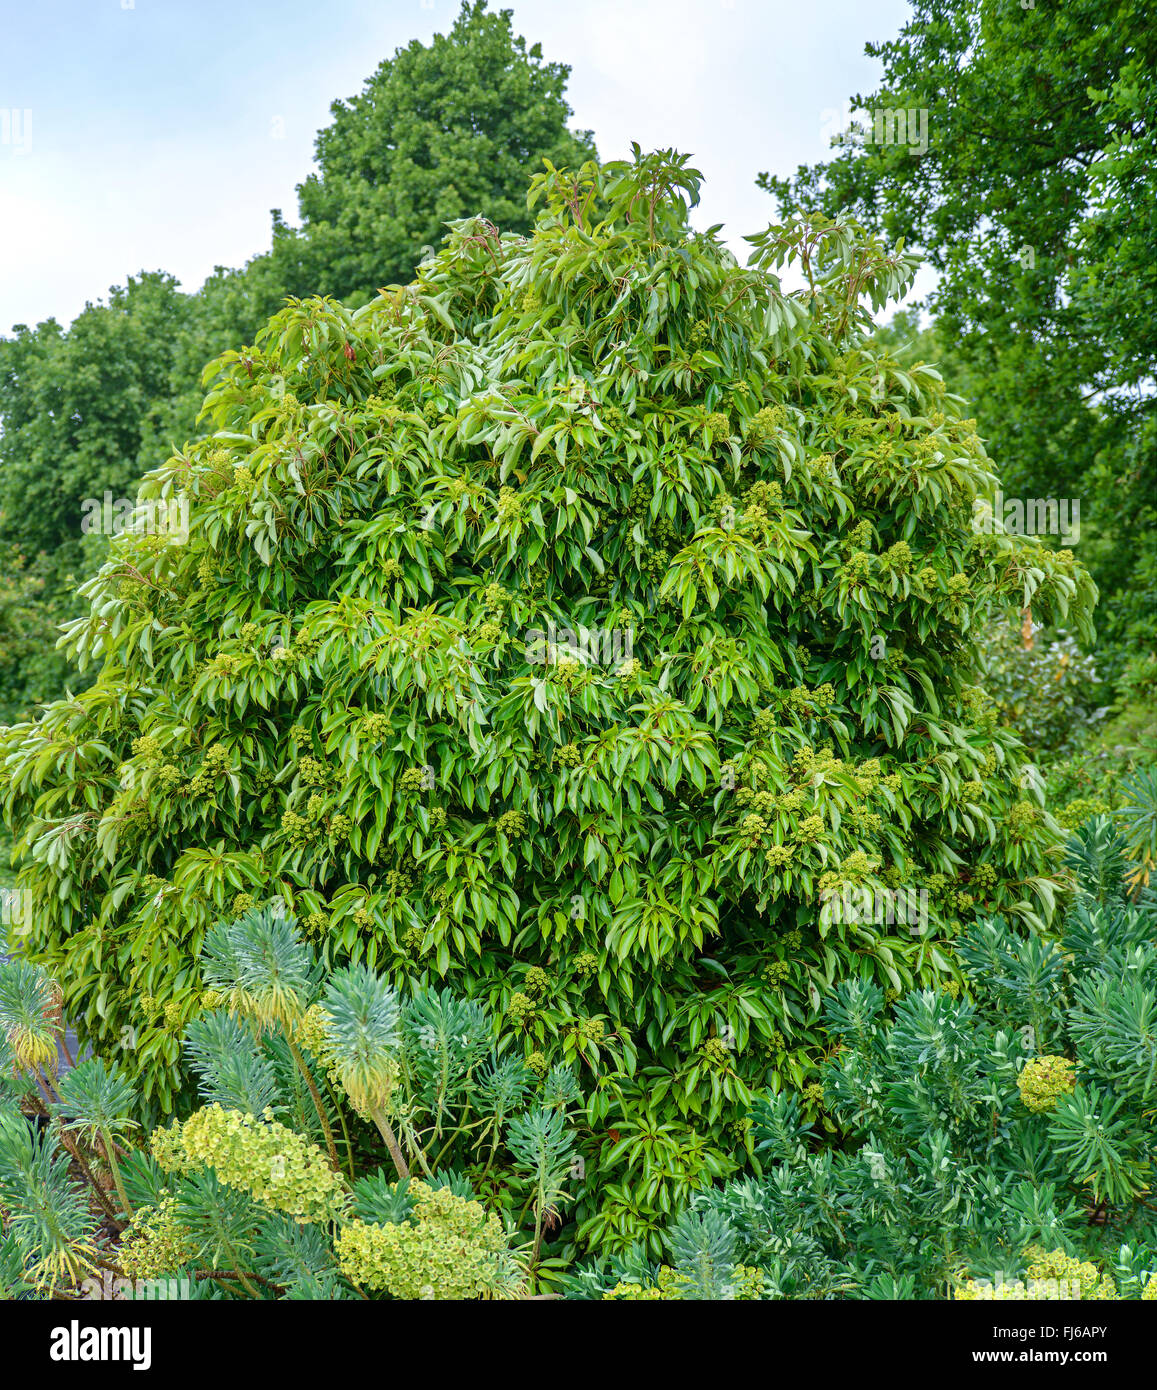 Yama-Gumura (Trochodendron aralioides), seul arbre, Royaume-Uni, Angleterre Banque D'Images